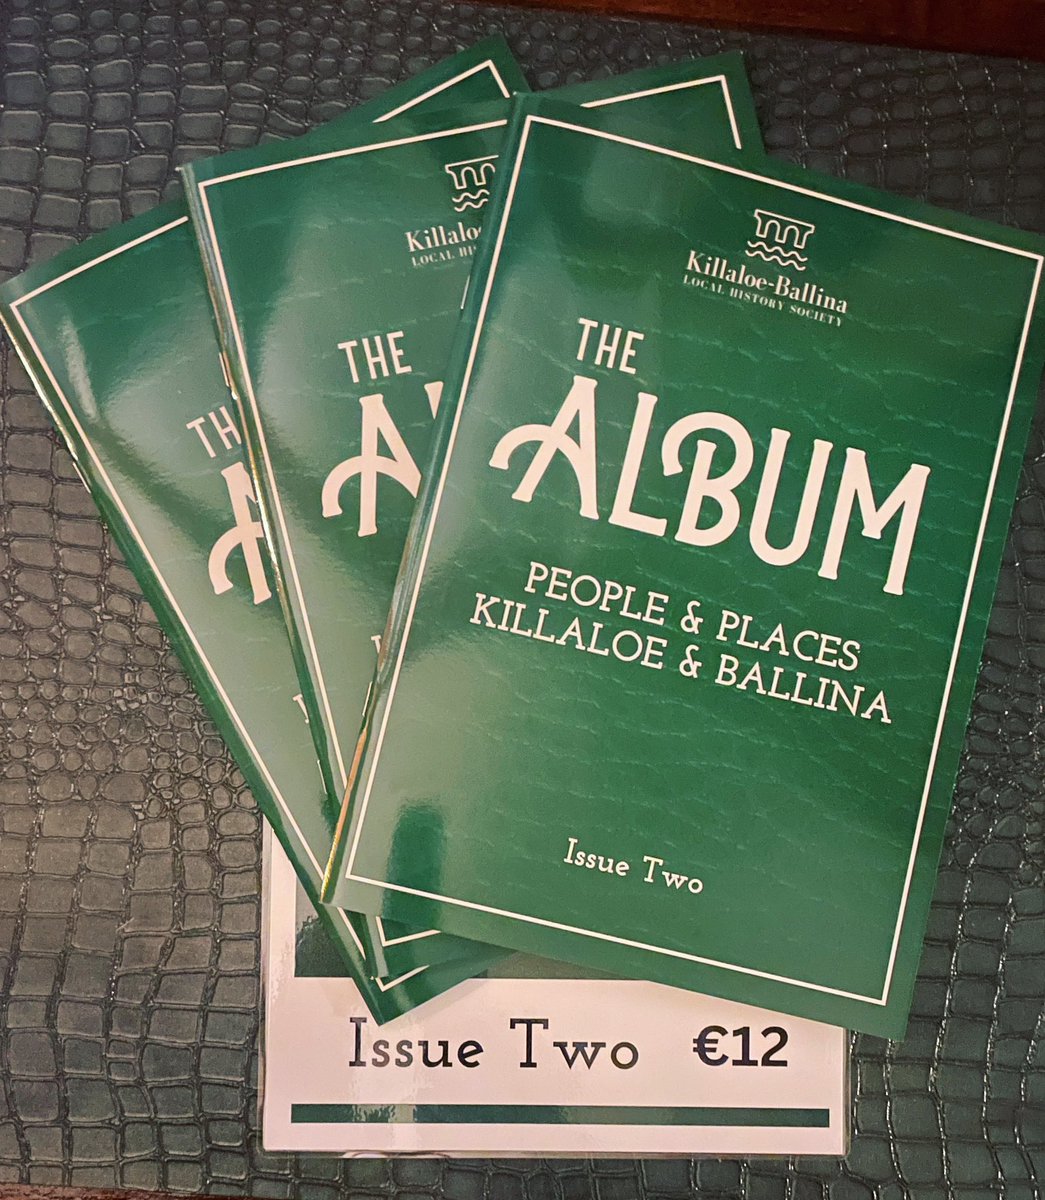 The Album Issue Two is on its way to the shops! From Sat 2nd Dec you can buy it at The Forge, Heaney’s Costcutter & Ponte Vecchio in Killaloe and in TJ’s Angling in Ballina. It can be bought directly from us, 1st we need to check 2023 postage costs so bear with us for a few days.